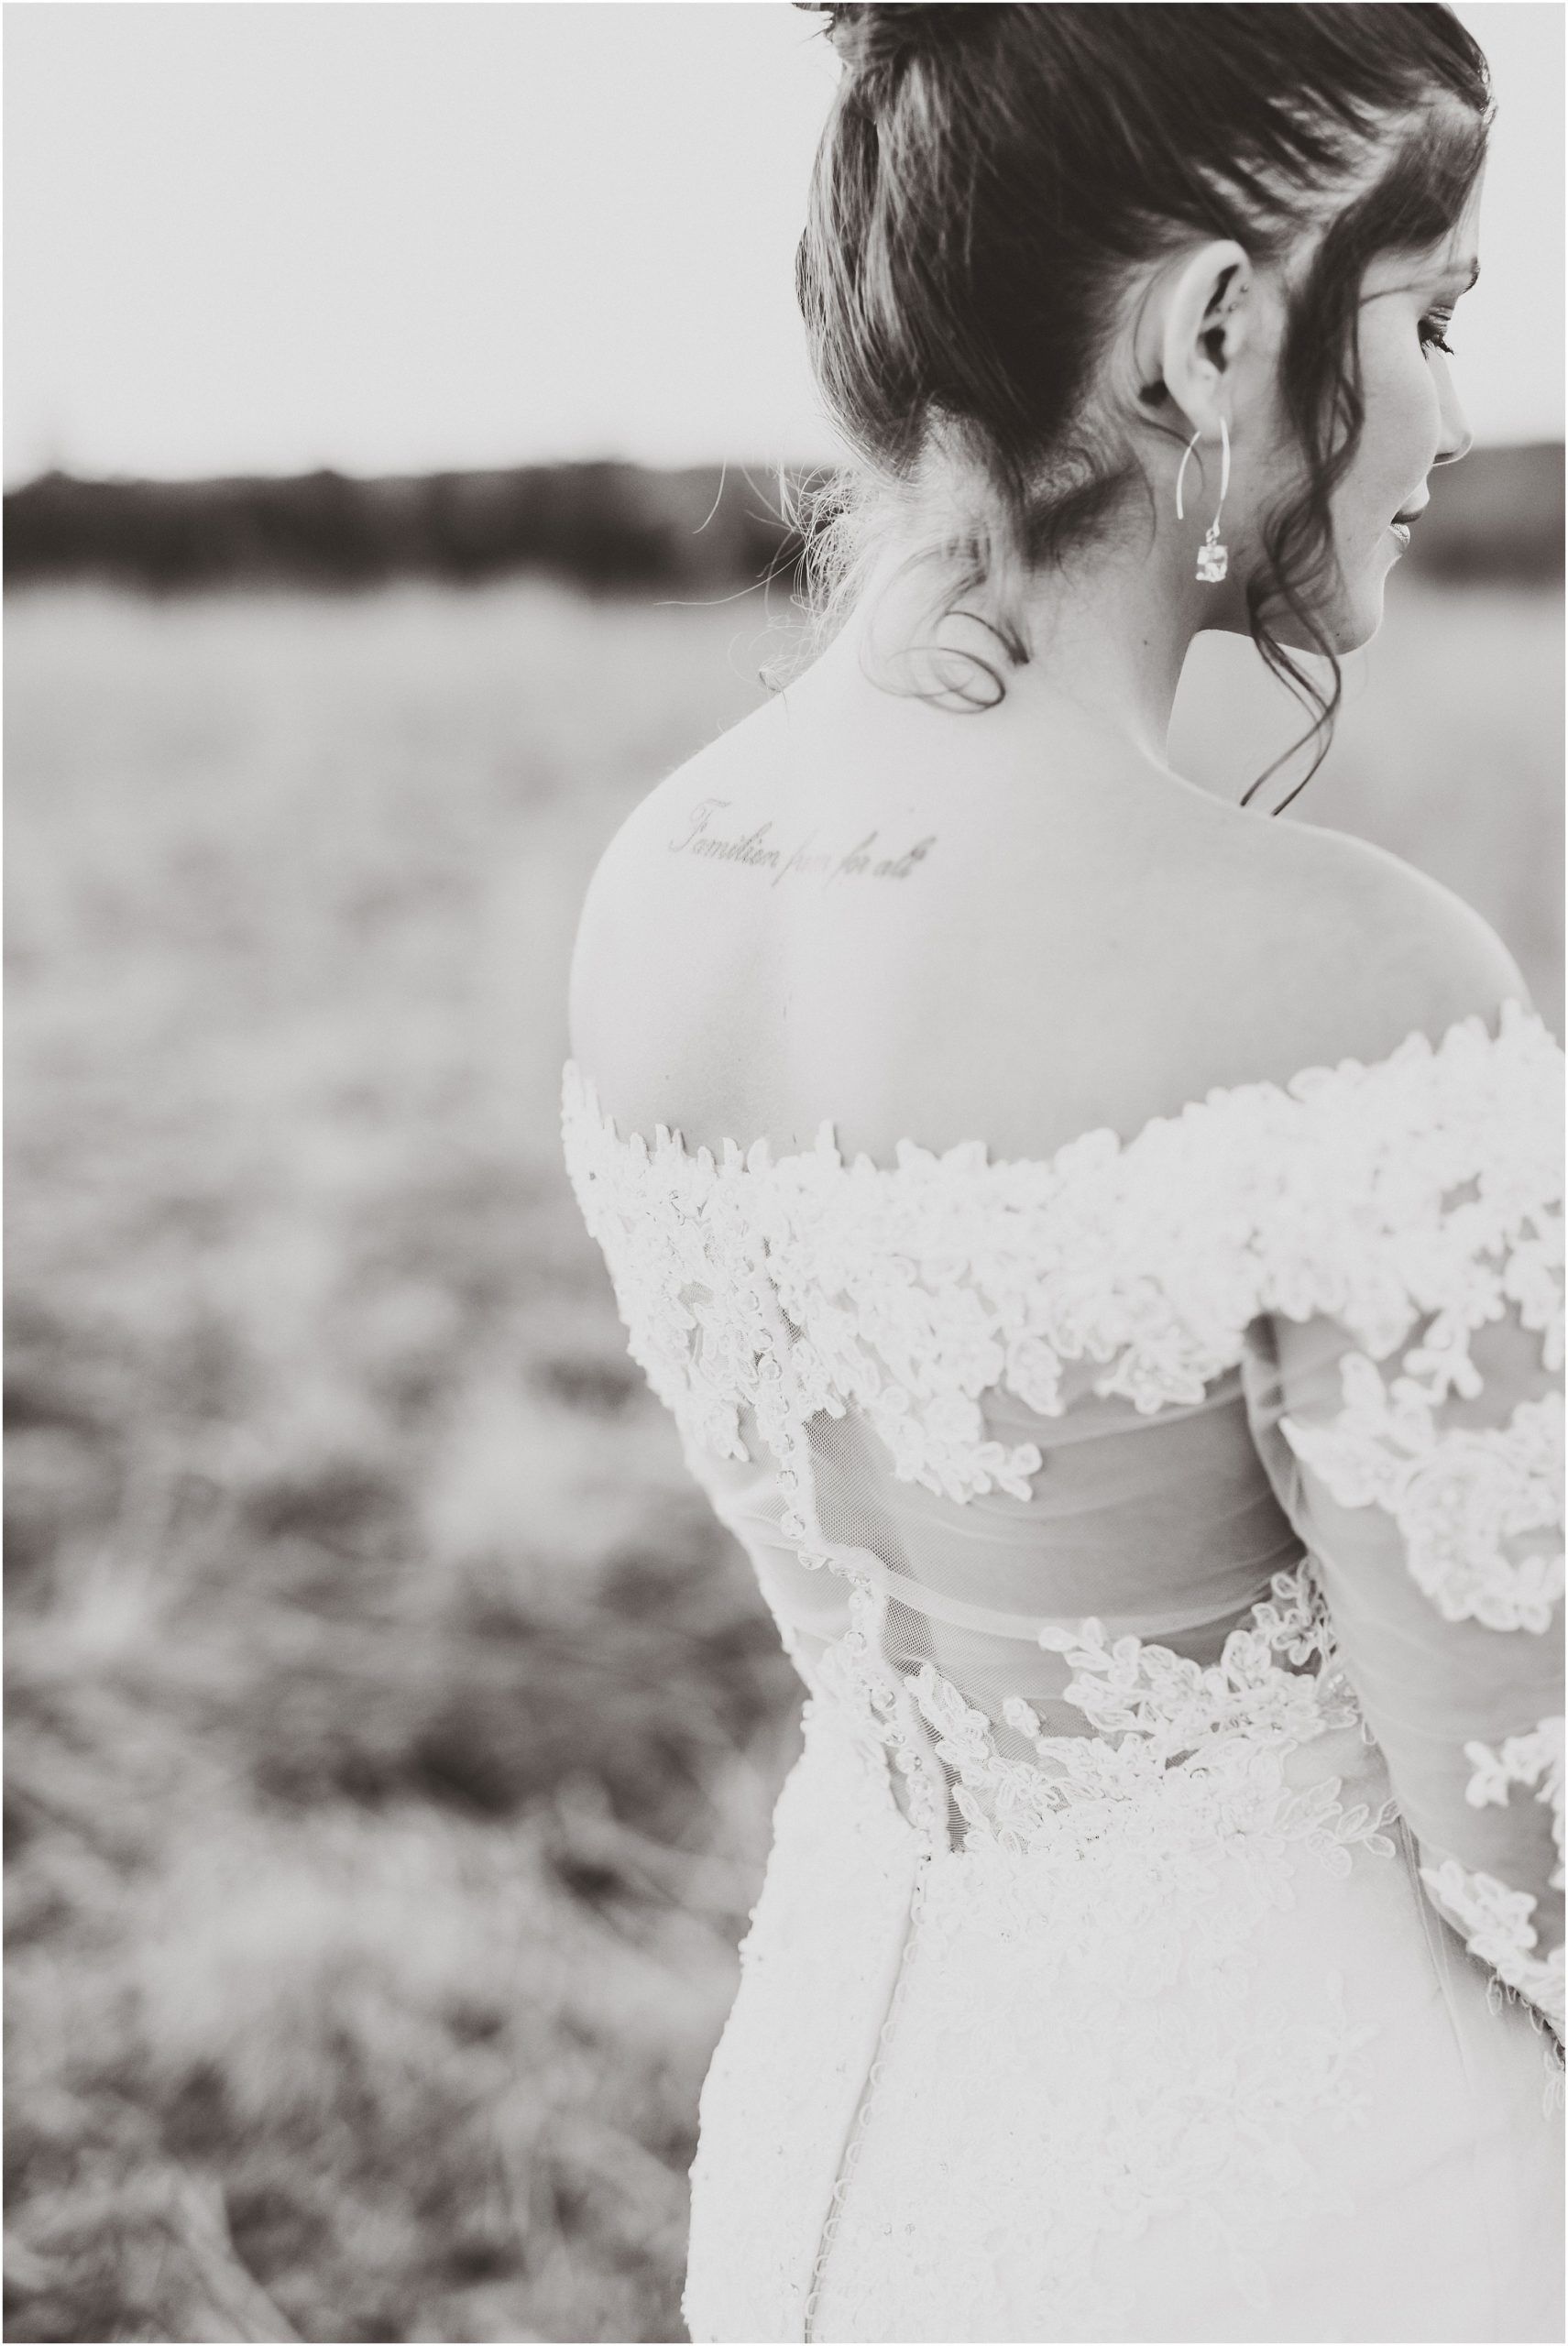 black and white image of bride's back tattoo and wedding dress during bridal session